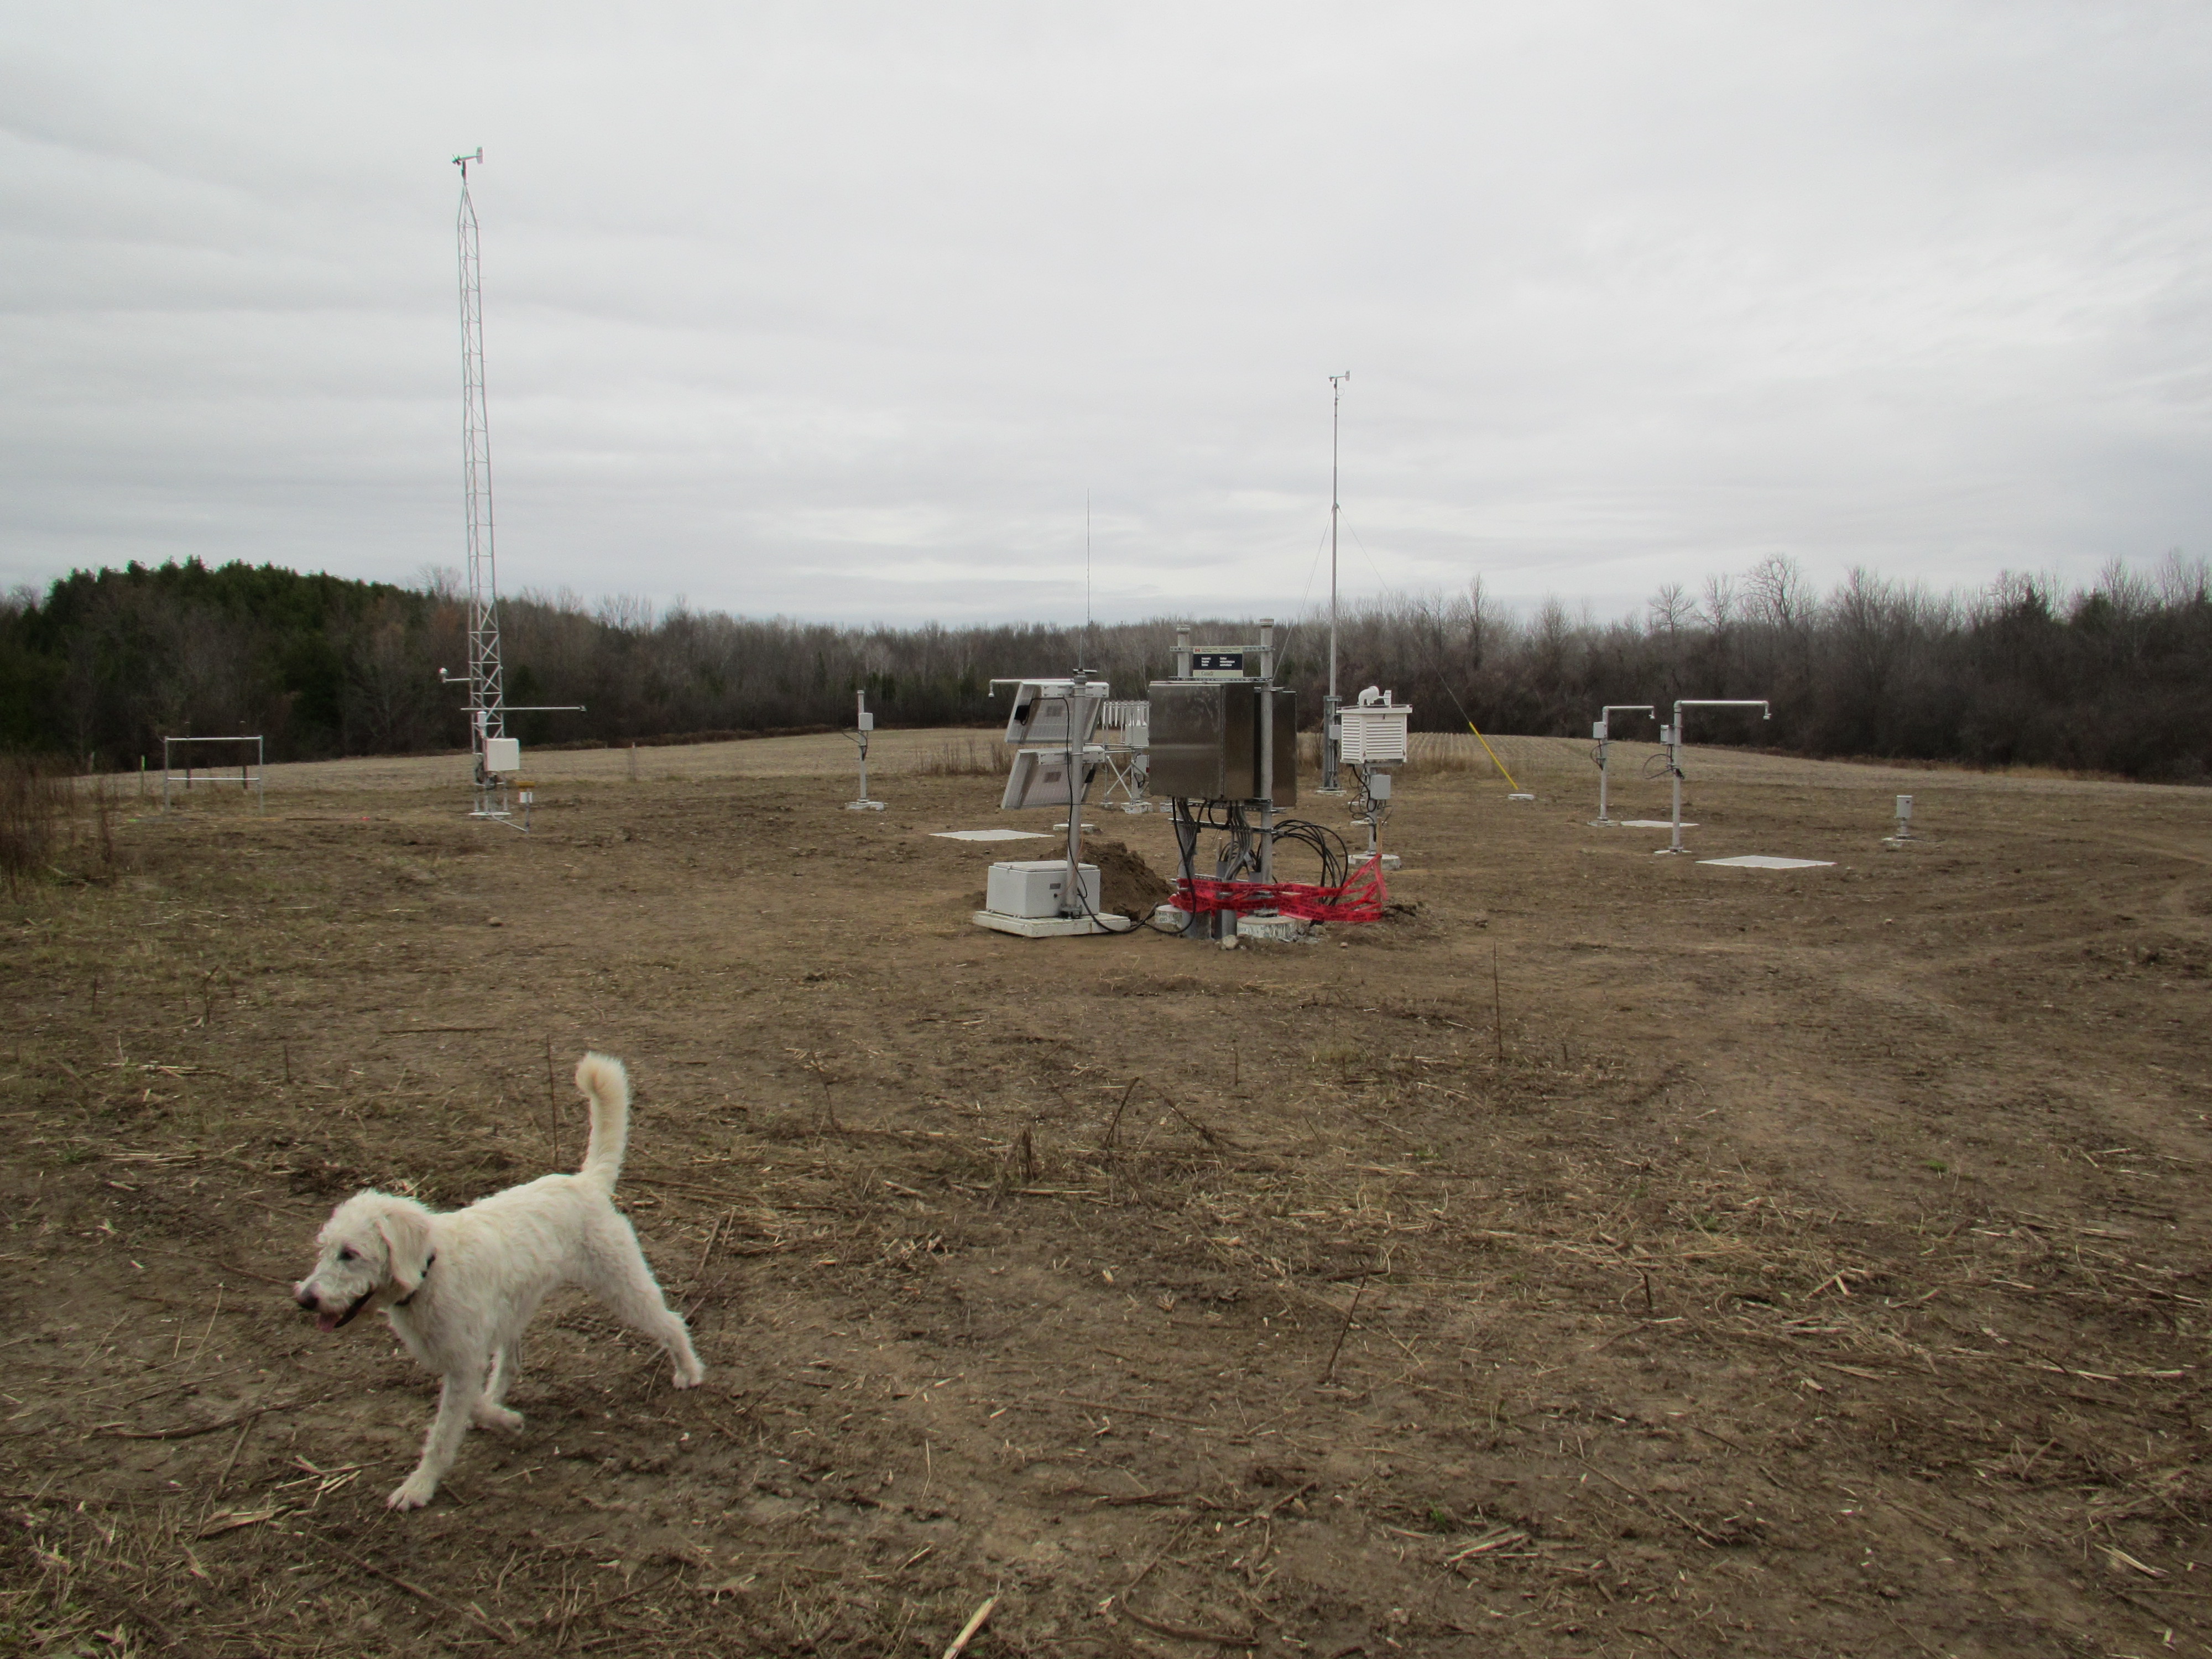 white dog on brown dirt field; brown trees against grey sky; white tower and red and white mechanical equipment